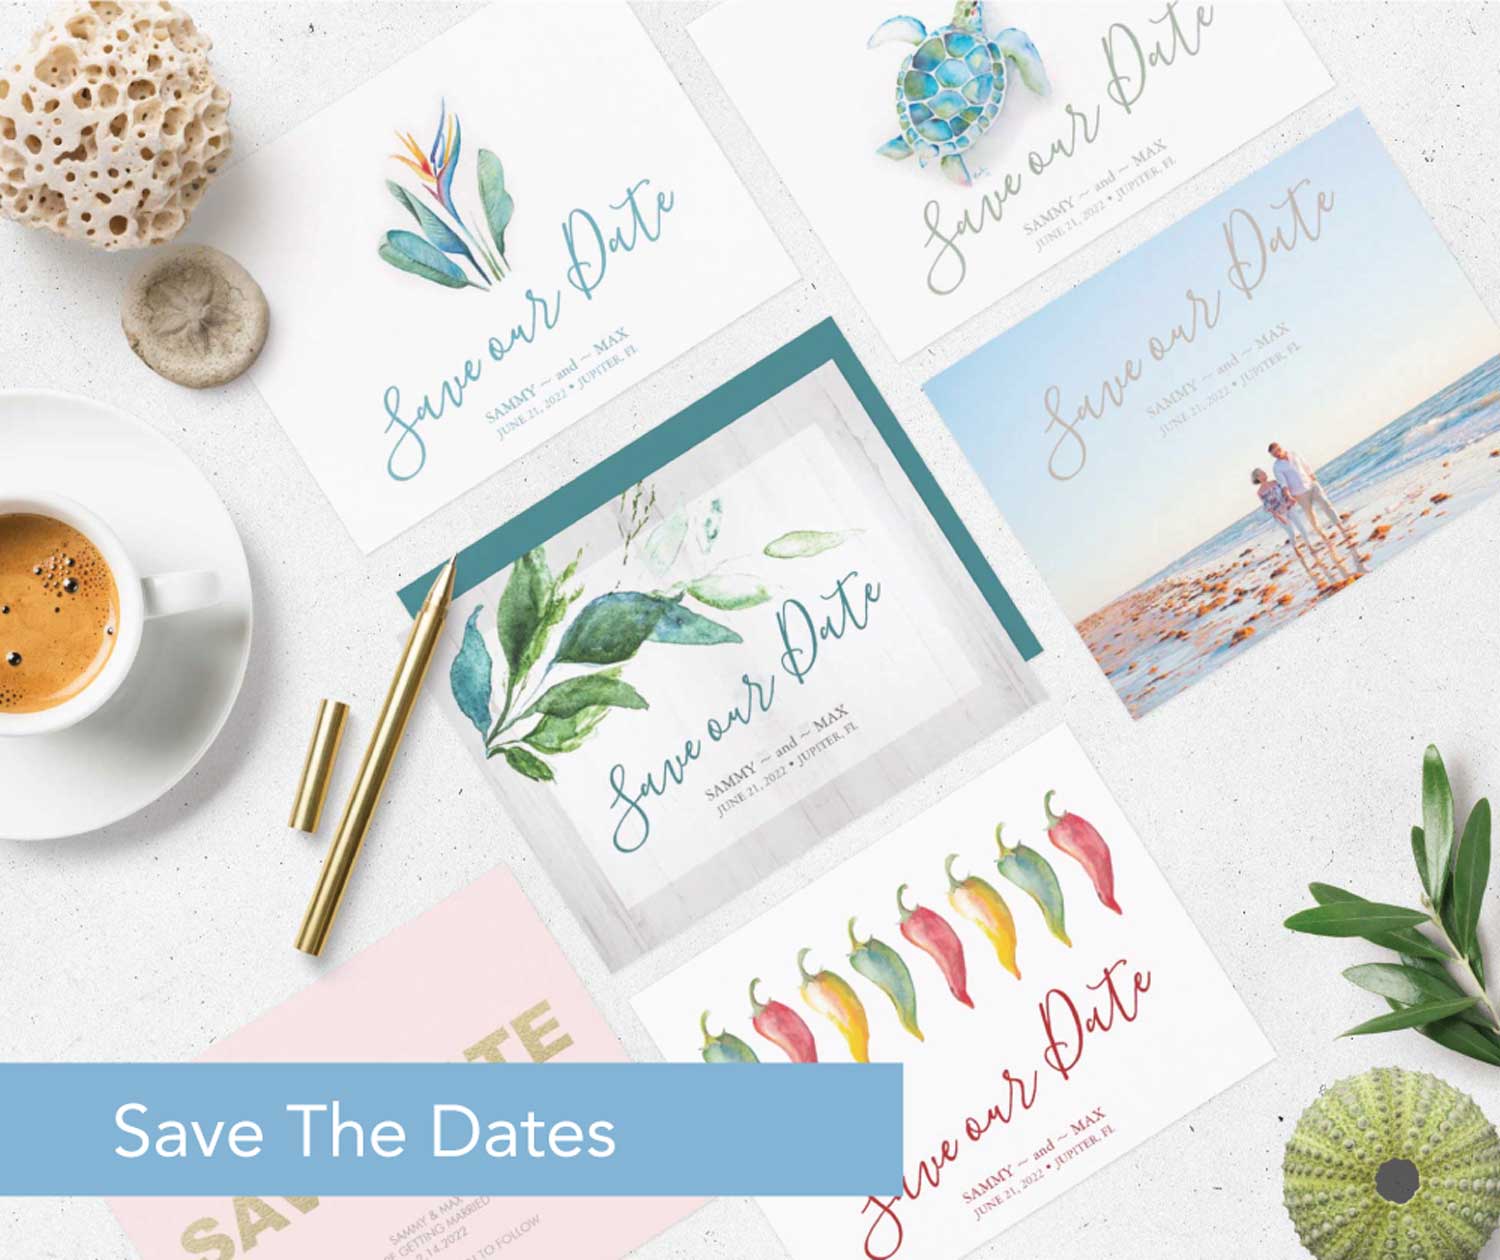 Save the date invitation cards. Click to shop the complete line